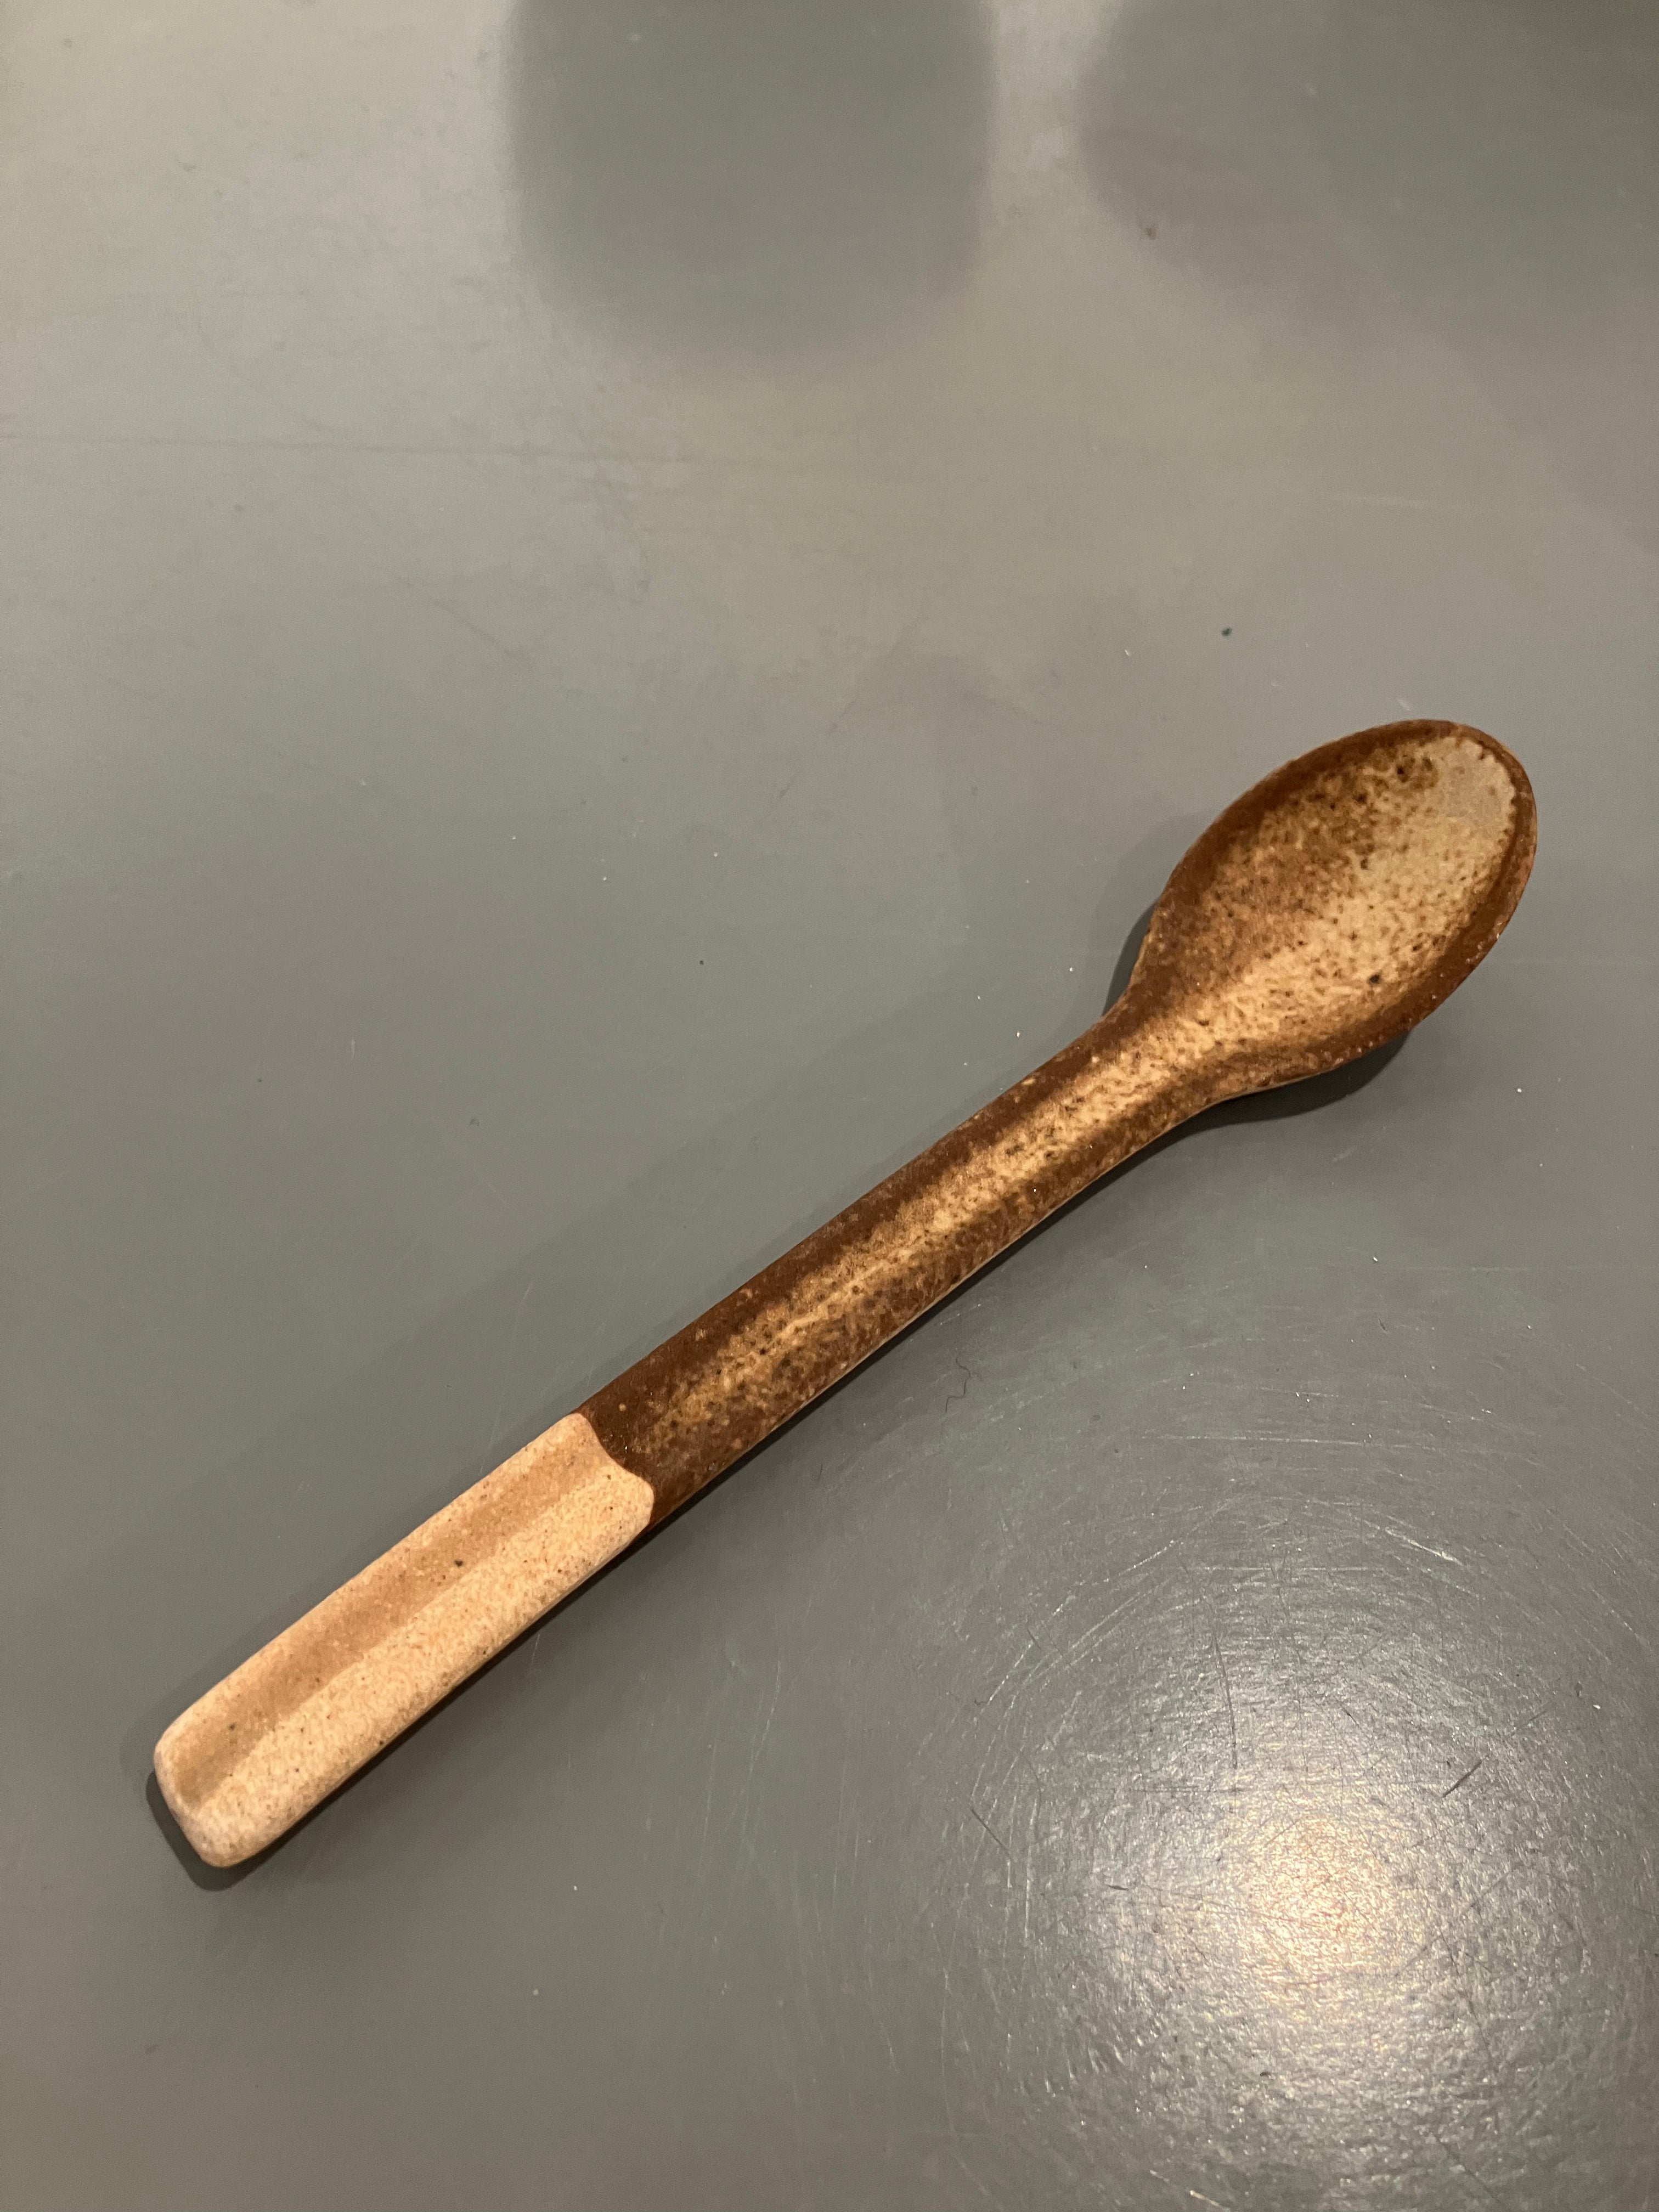 Rustic ceramic spoon with brown glaze